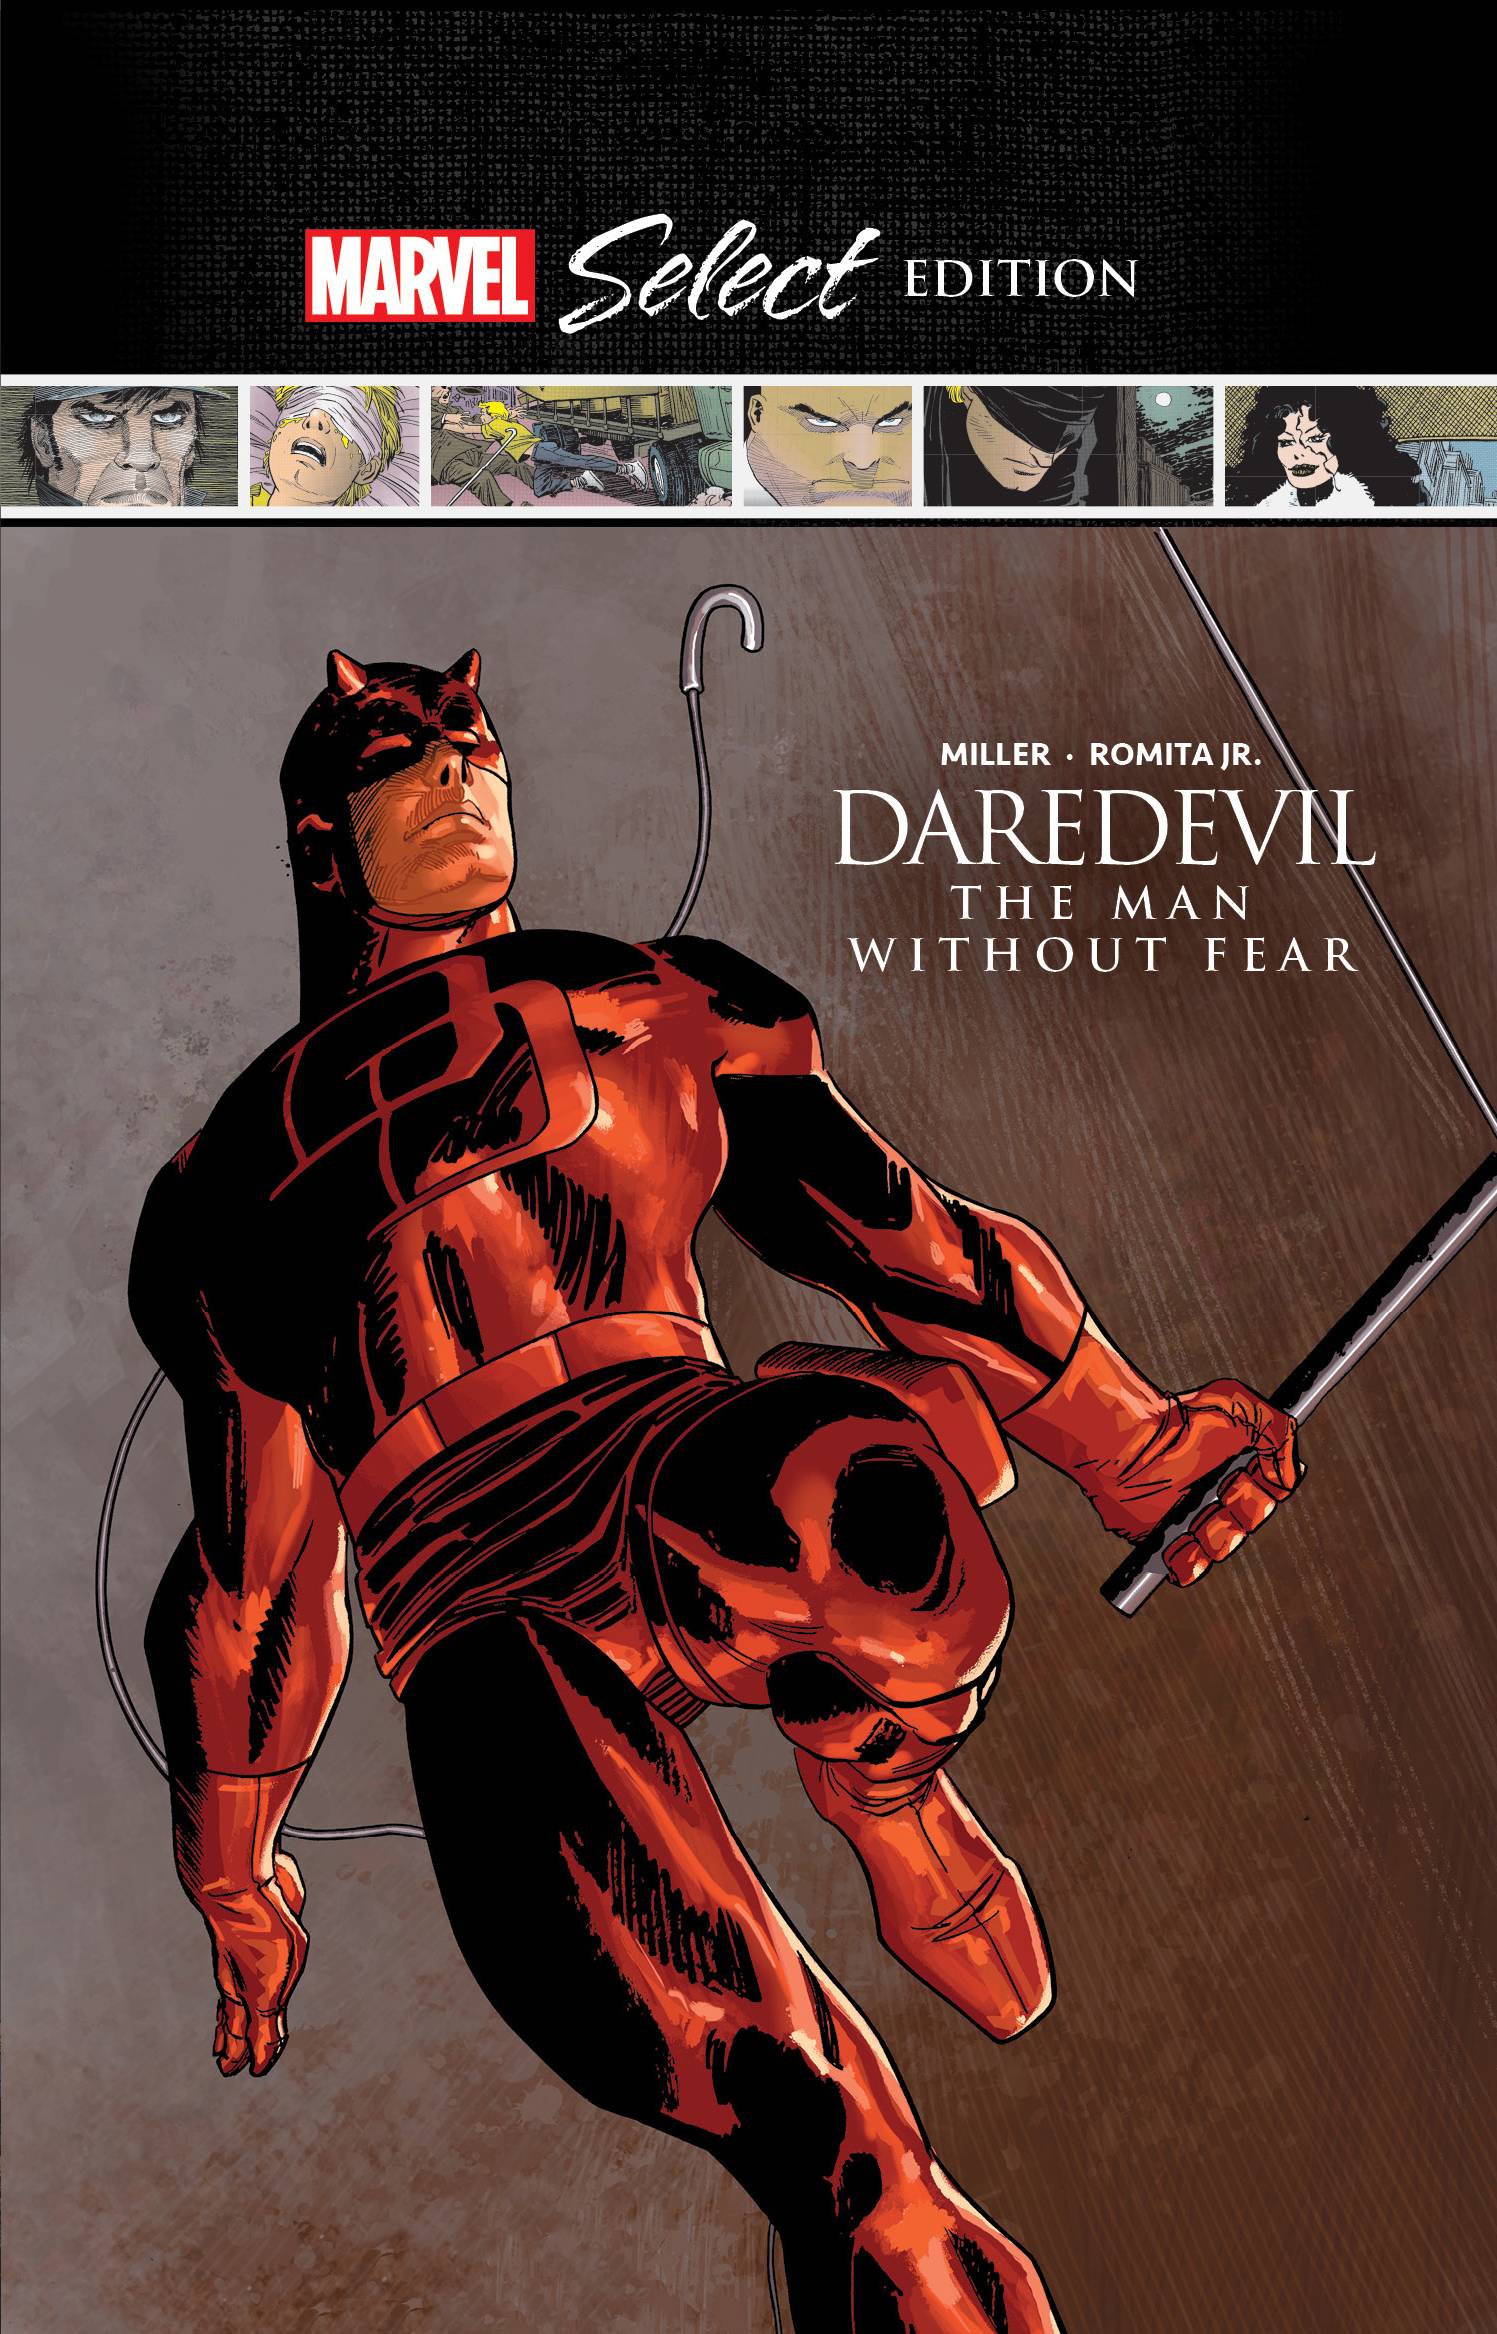 DAREDEVIL HC MAN WITHOUT FEAR MARVEL SELECT